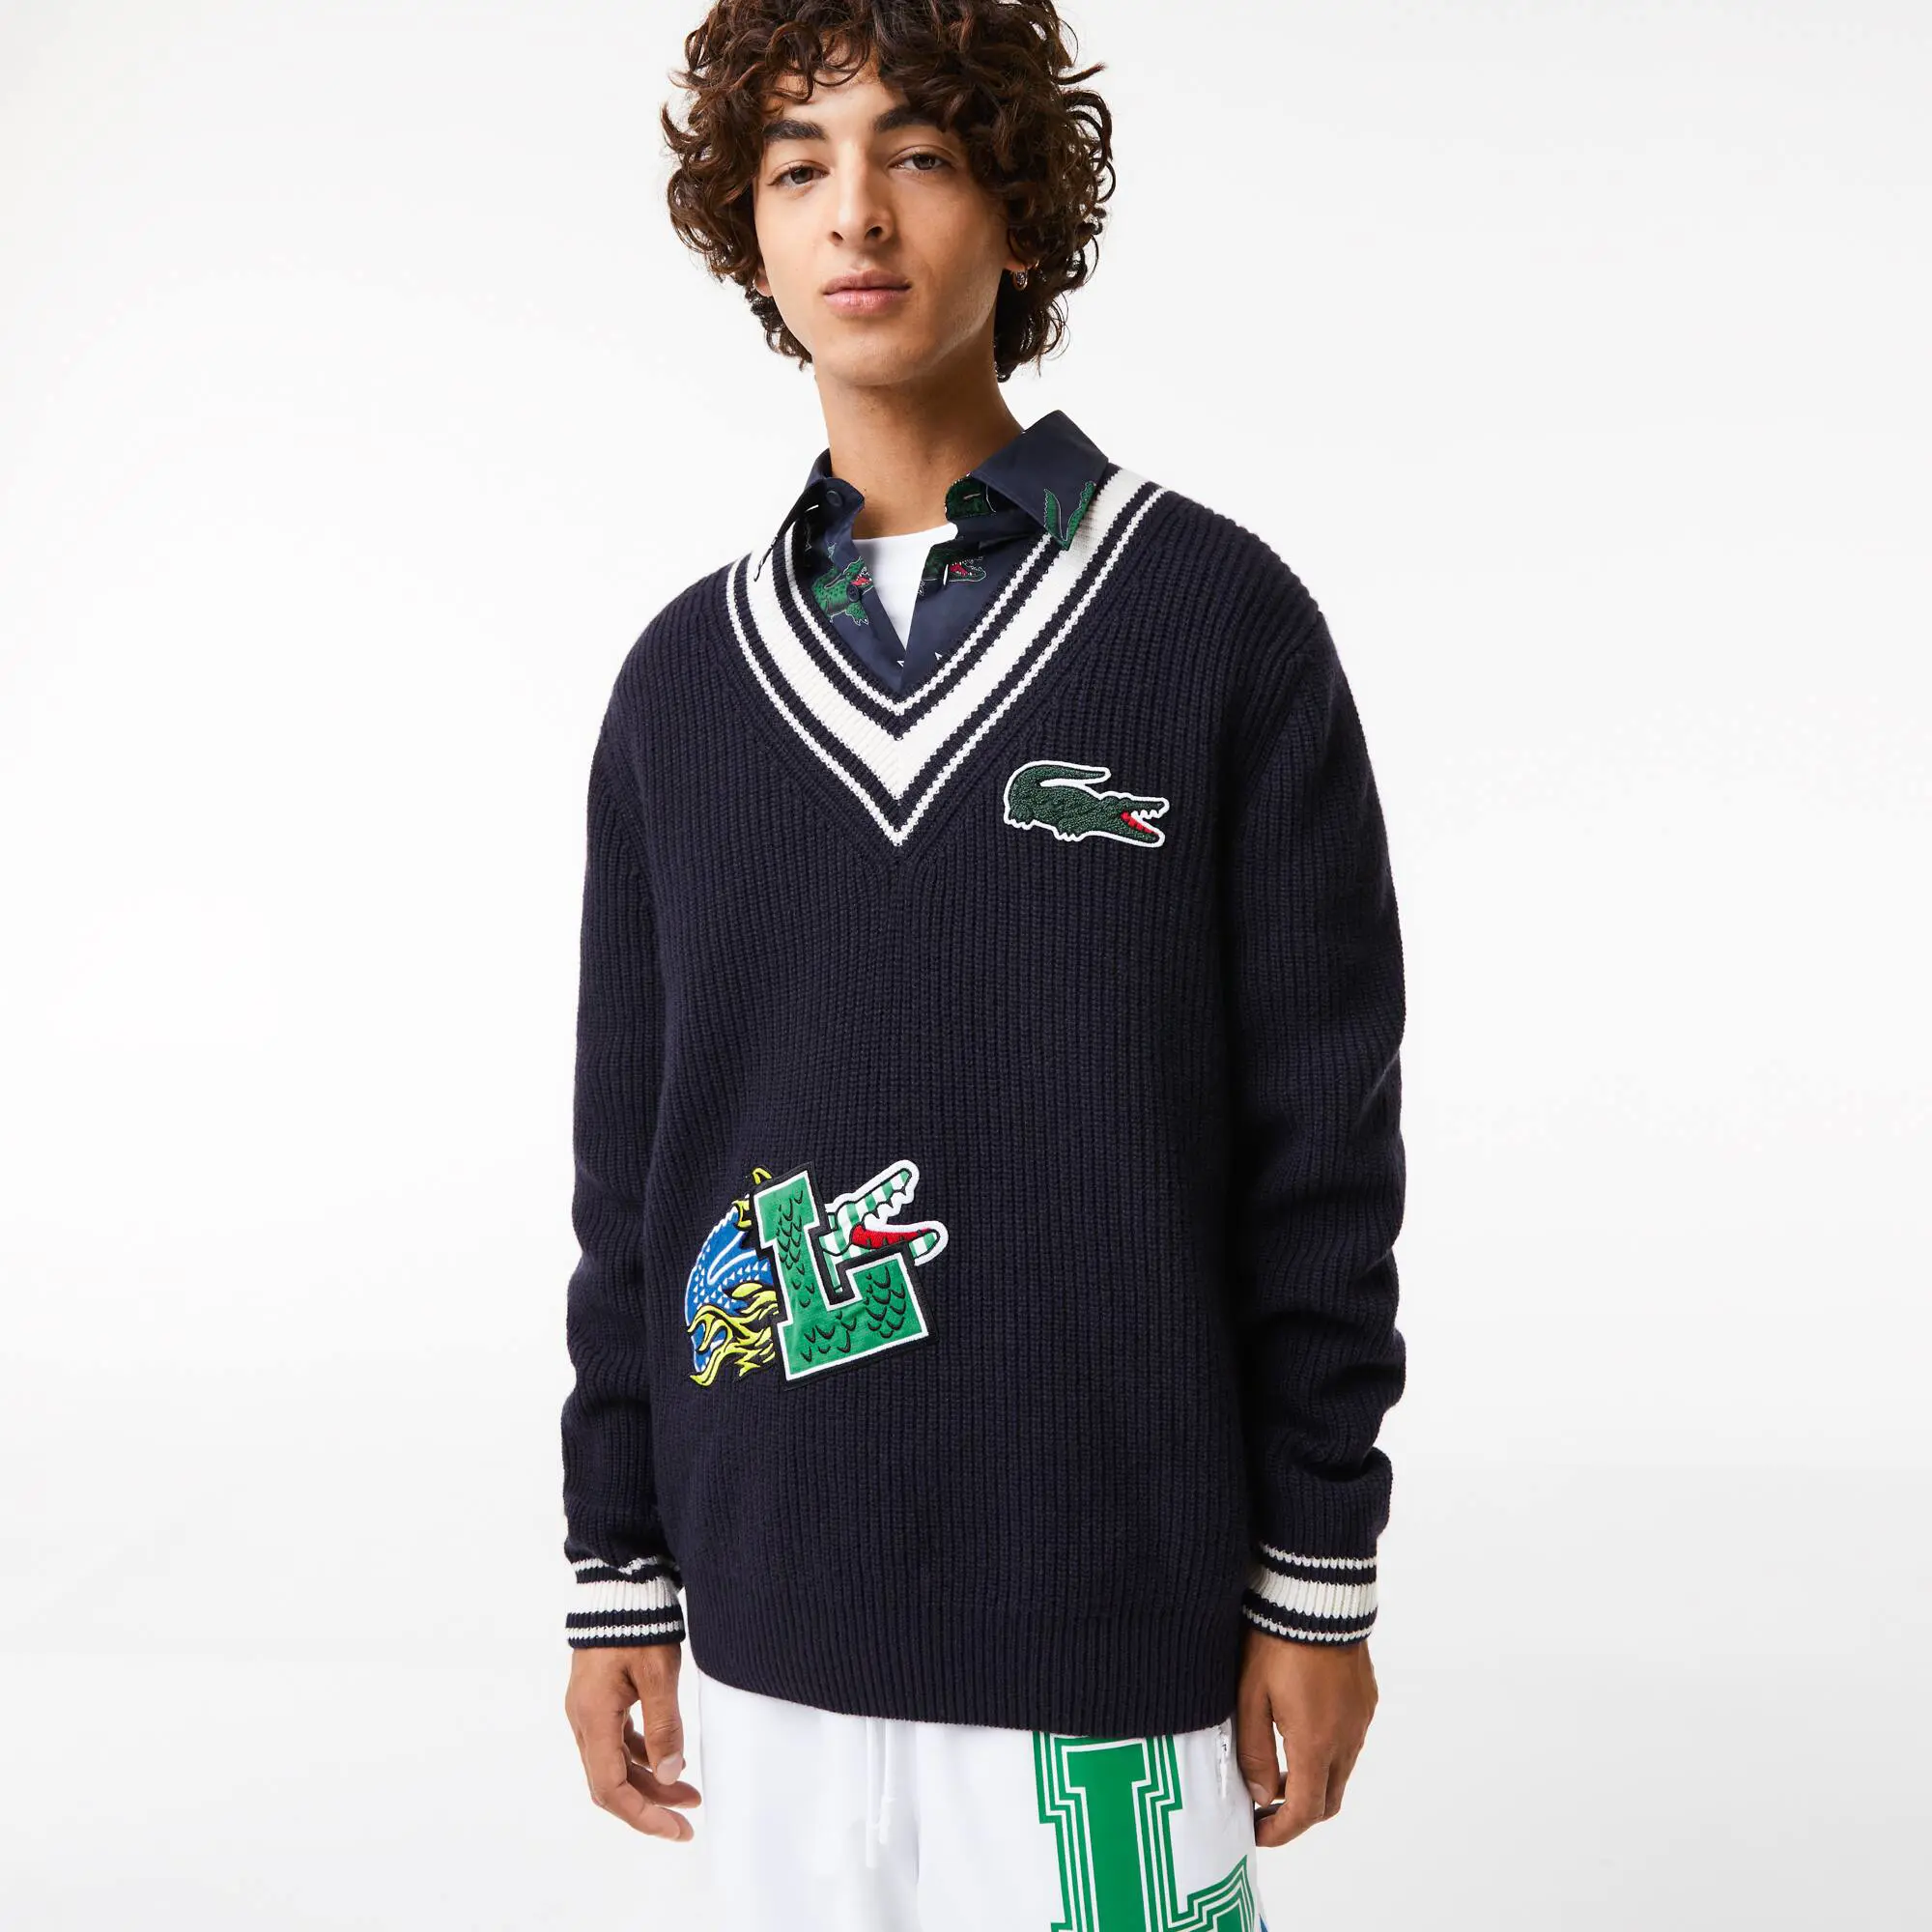 Lacoste Men's Lacoste Holiday Comic Badge Striped V-Neck Sweater. 1